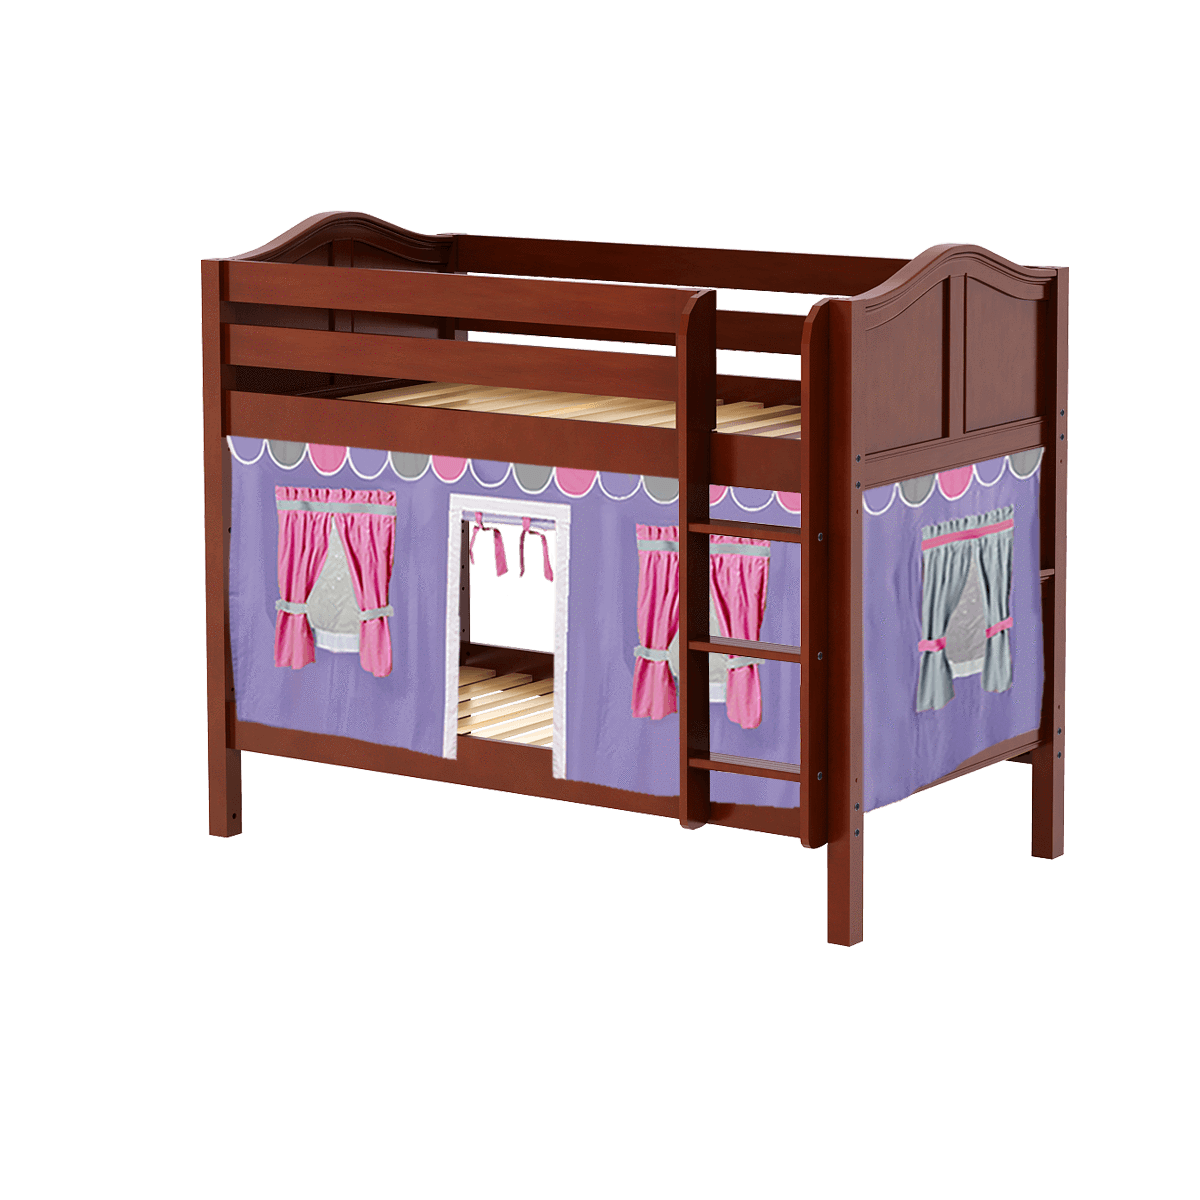 Maxtrix Twin Low Bunk Bed with Straight Ladder + Curtain